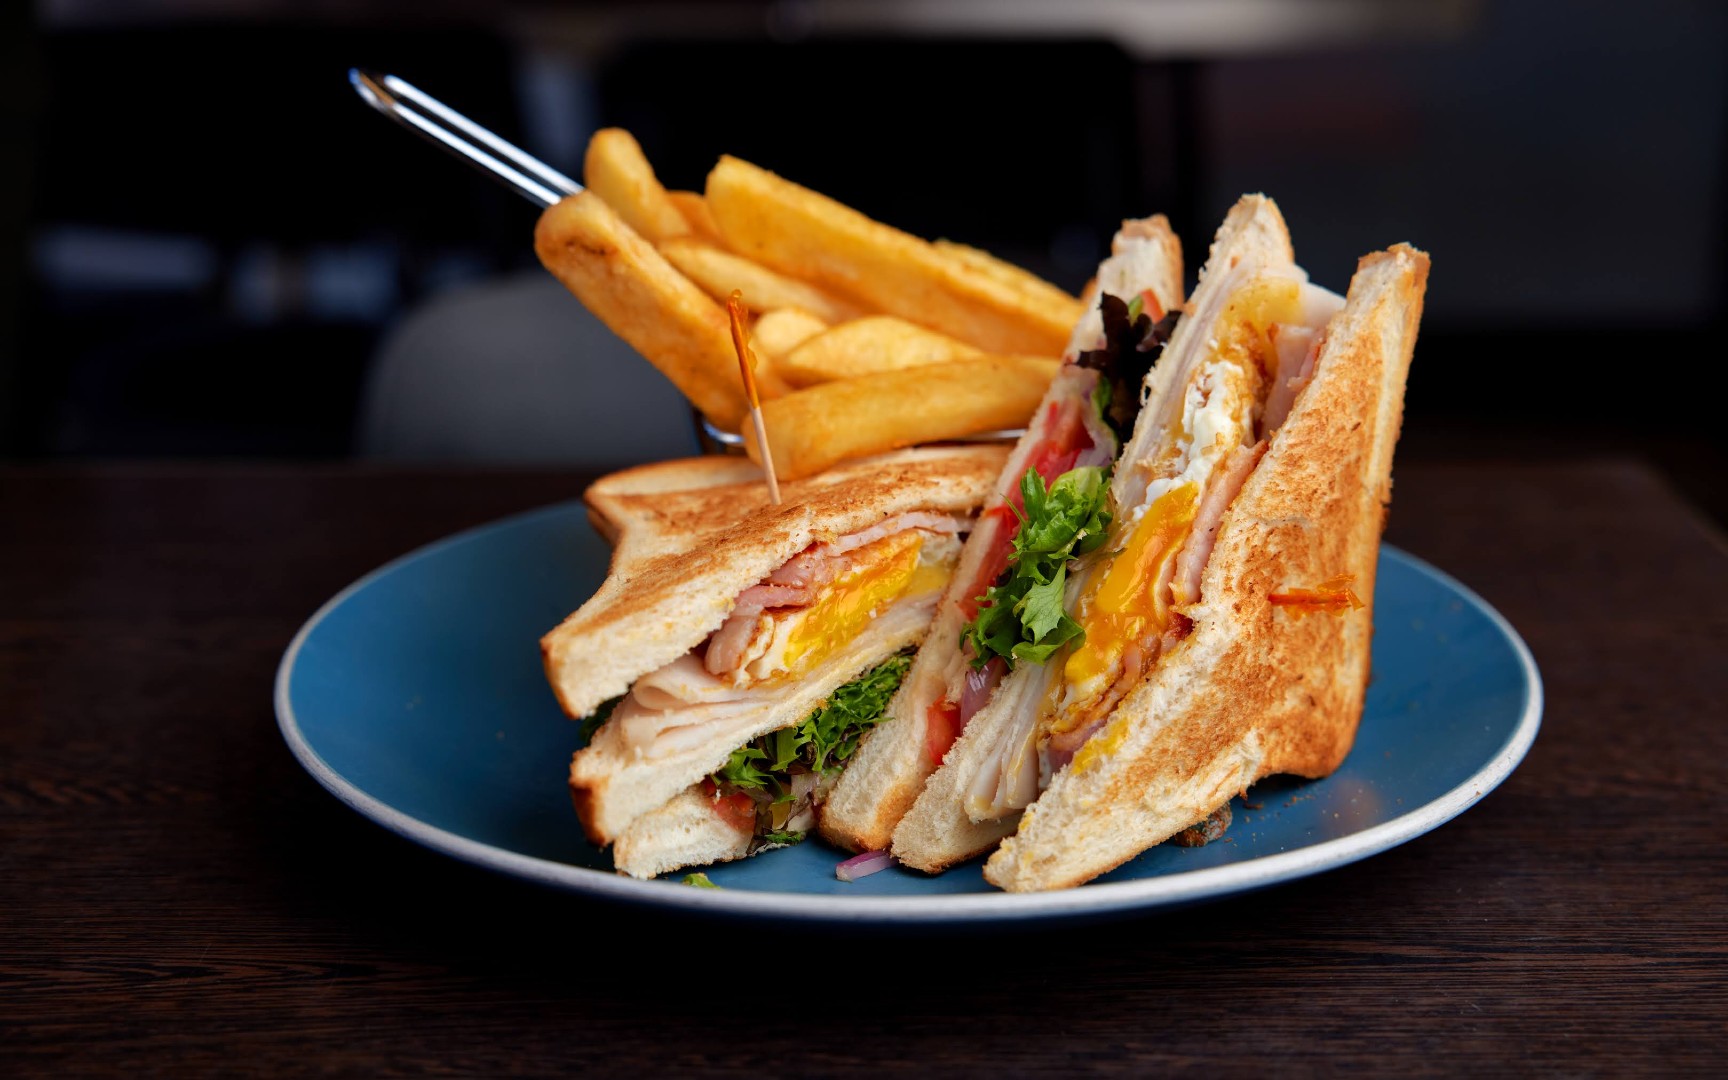 Chatter Box Club Sandwich and Chips - Club Sandwich and Chips